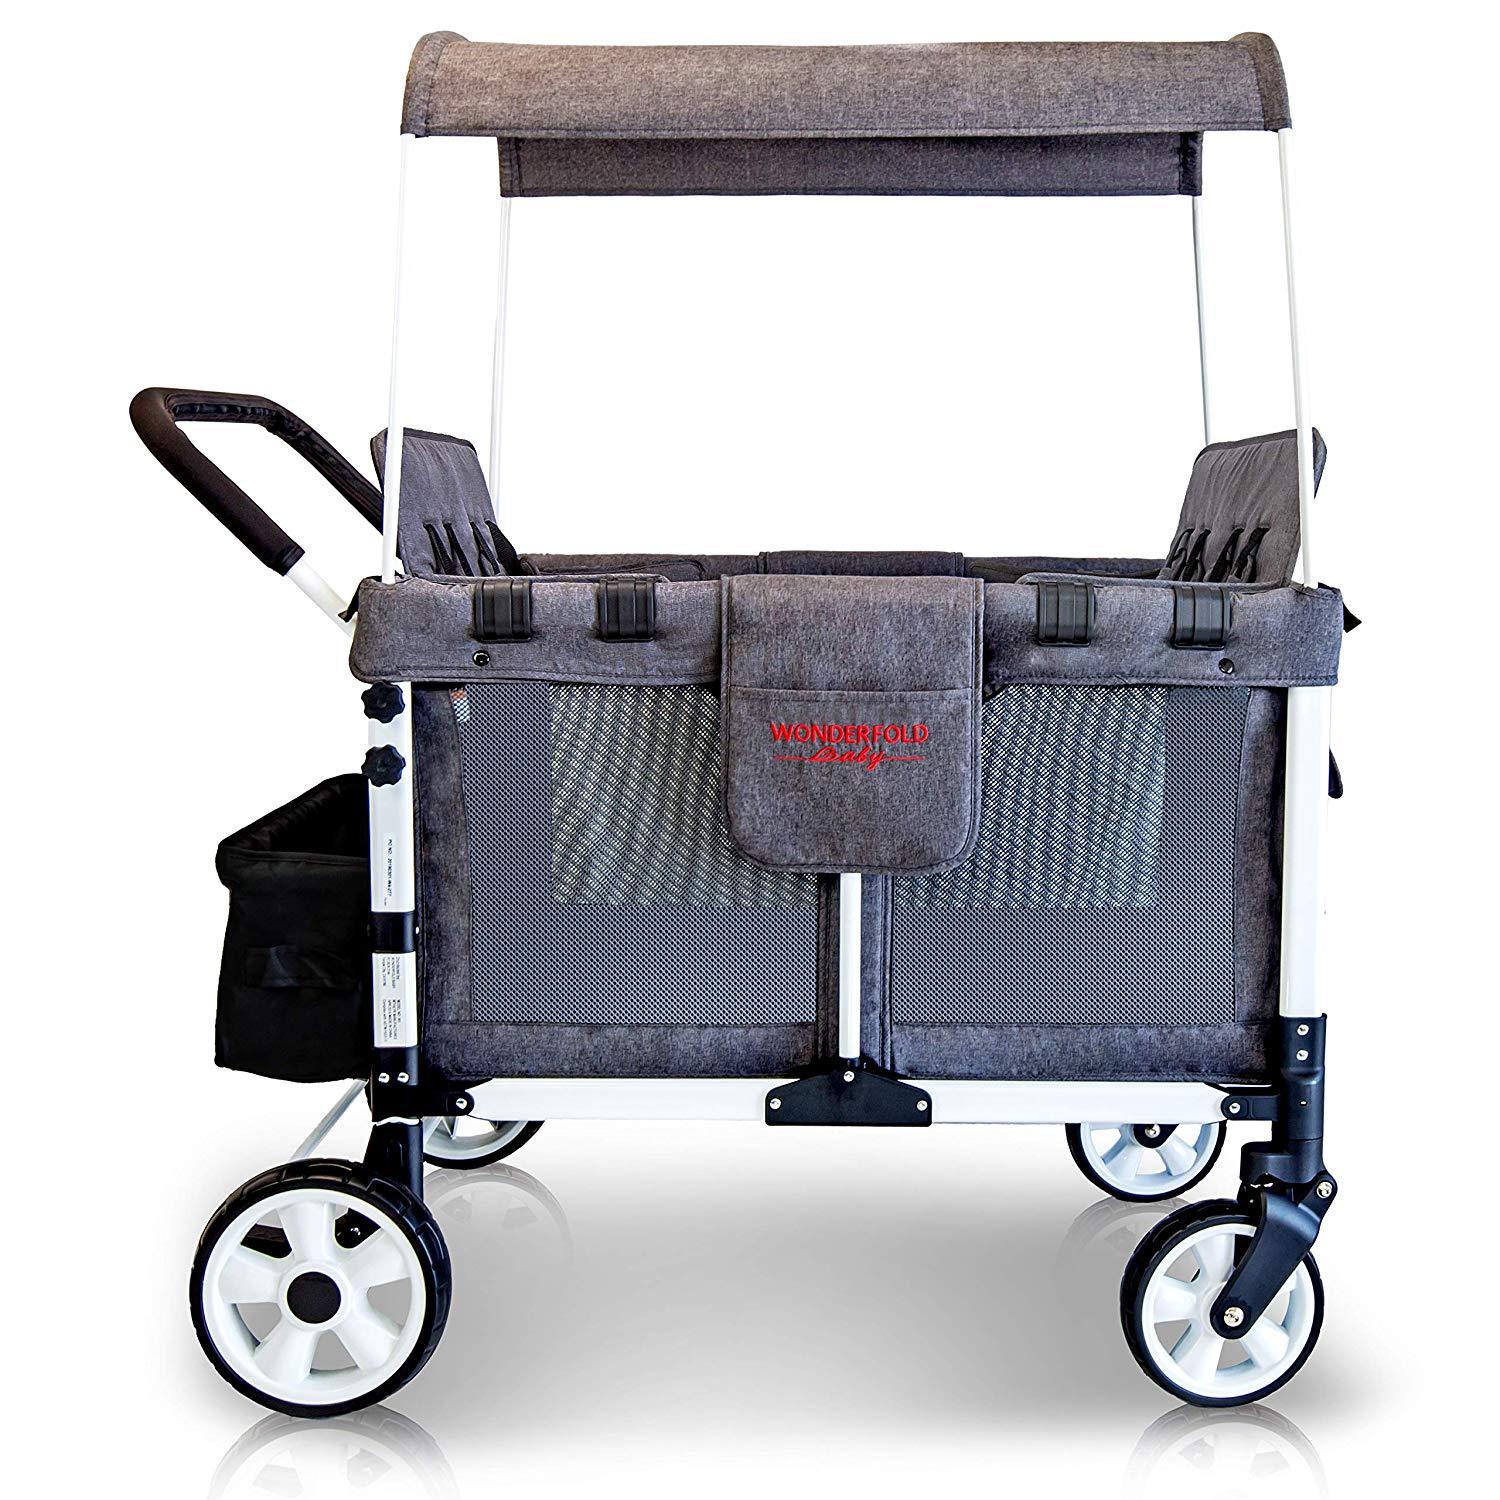 WonderFold Baby, WonderFold Baby Multi-Function Folding Quad Stroller Wagon with Removable Canopy and Seats Gray New